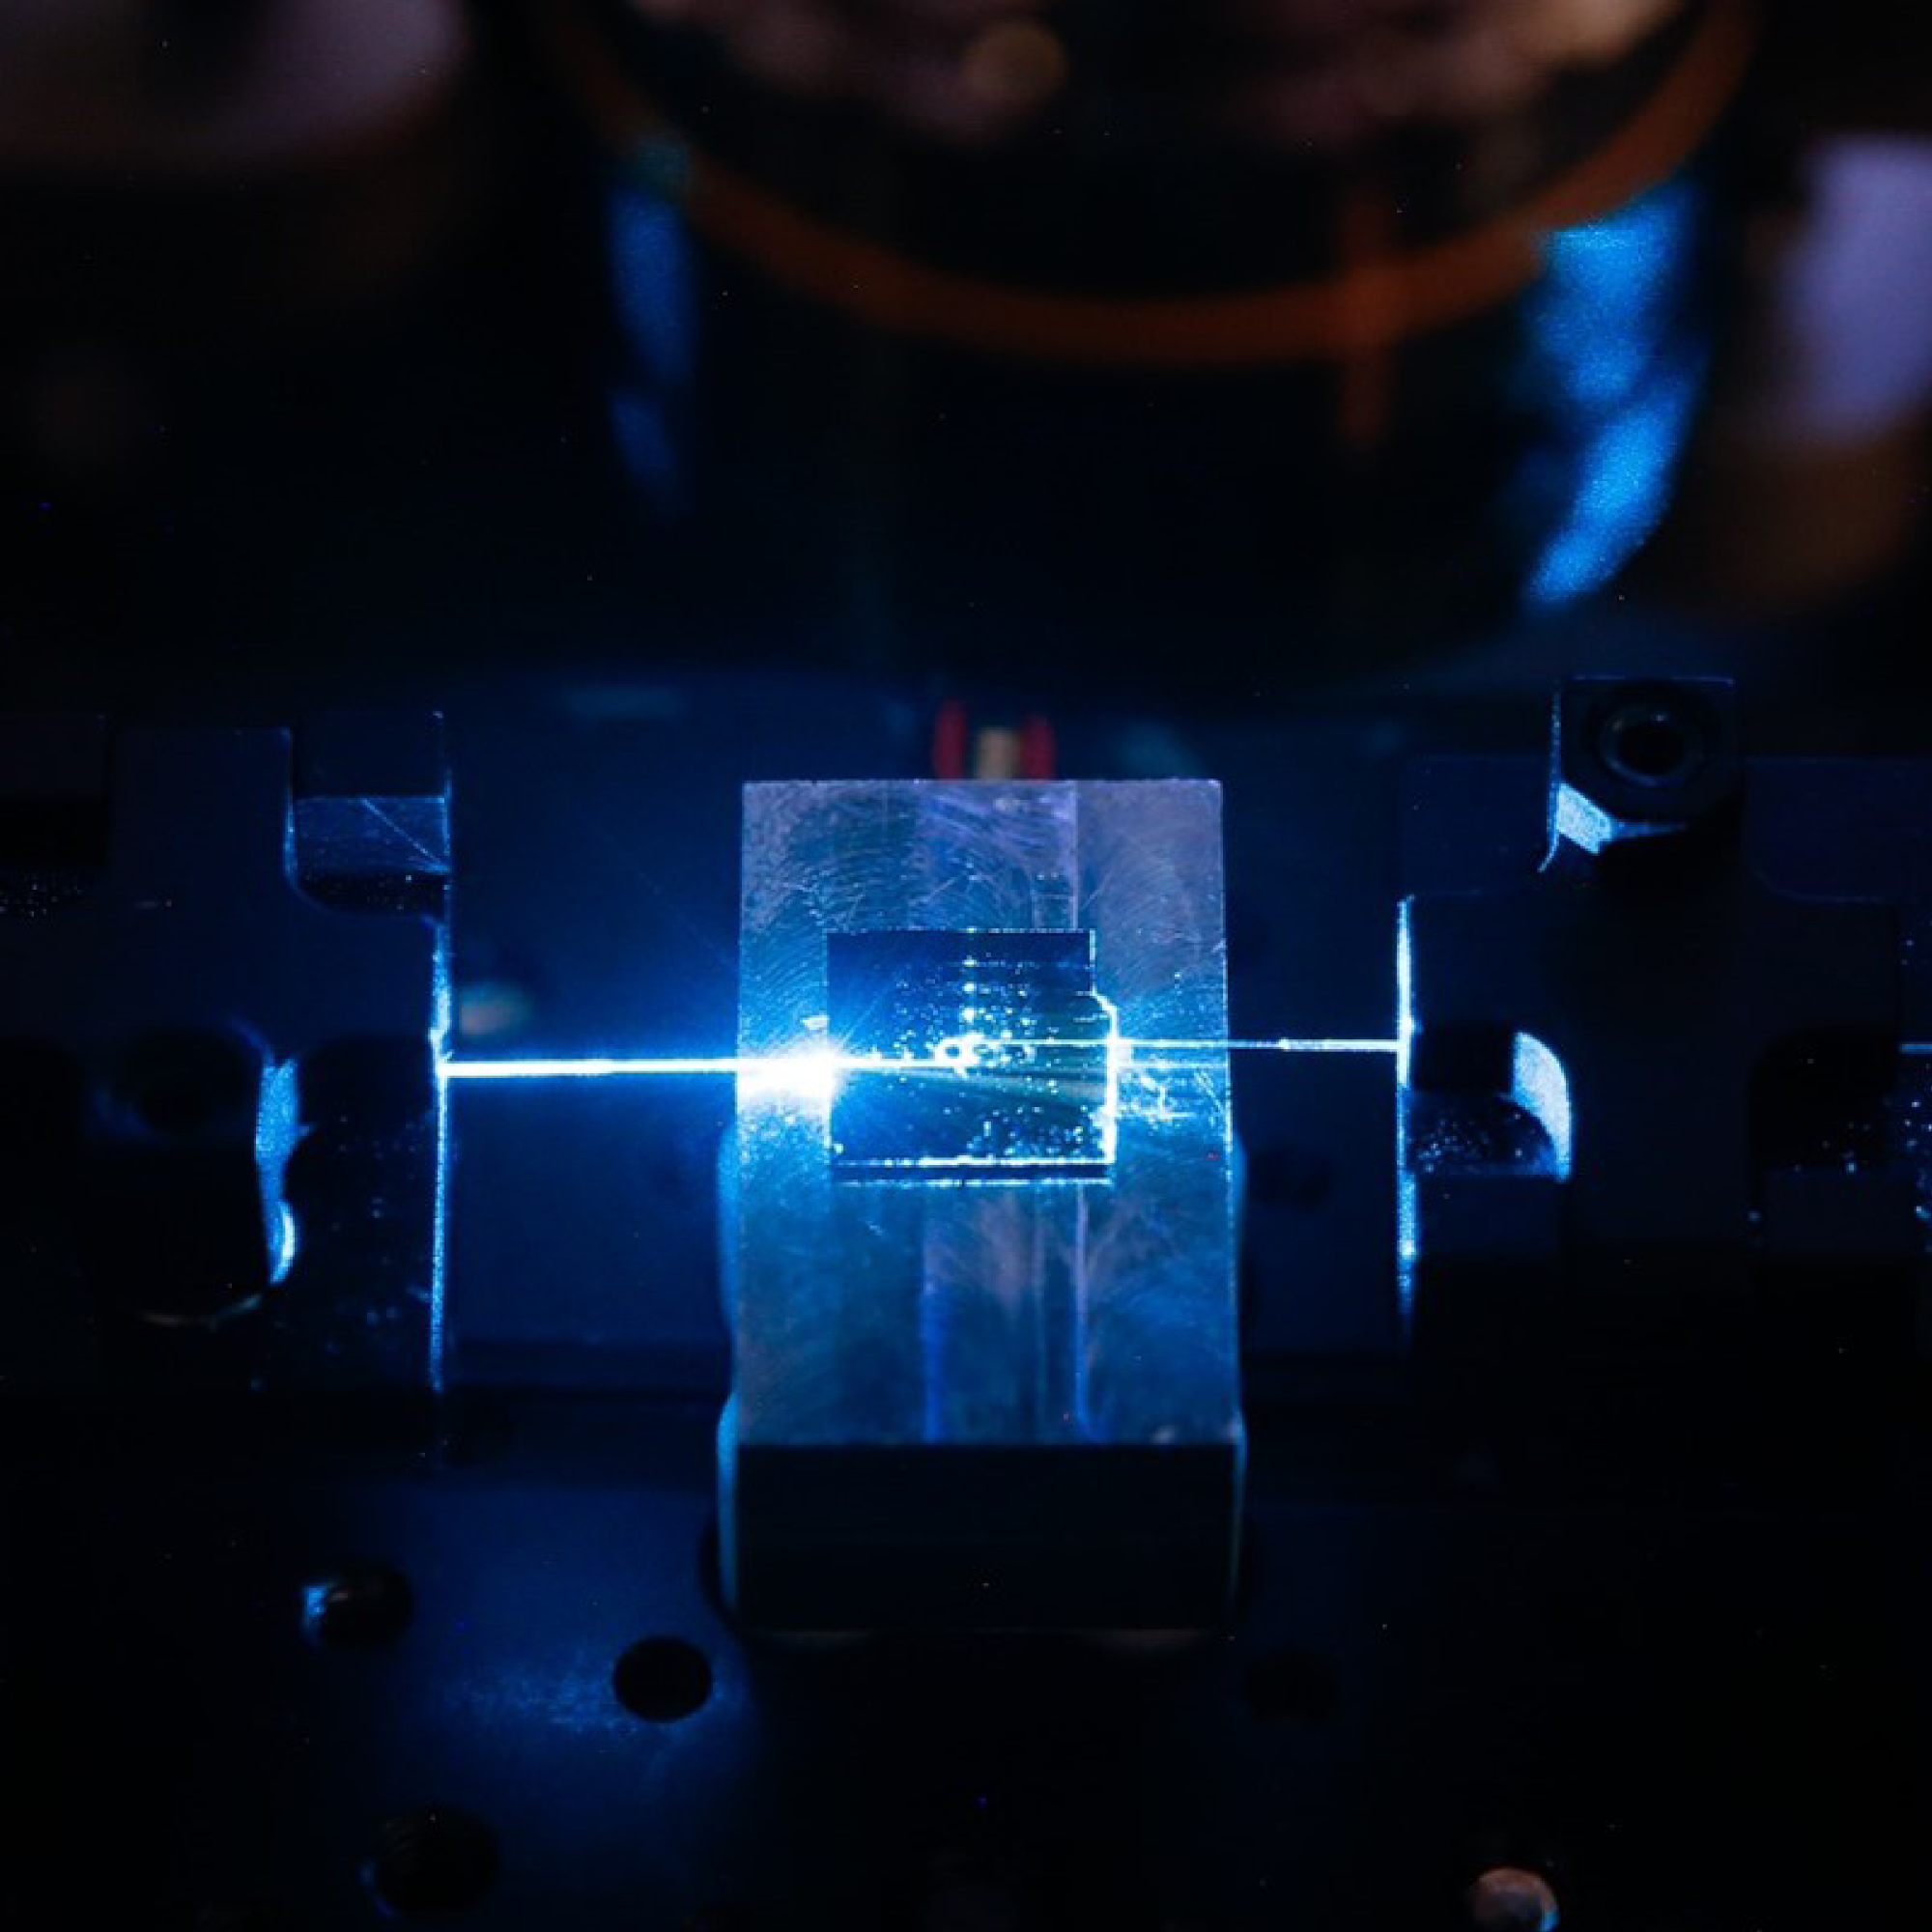 Developing Chip-Based Photonic Resonators for UV and Visible Light